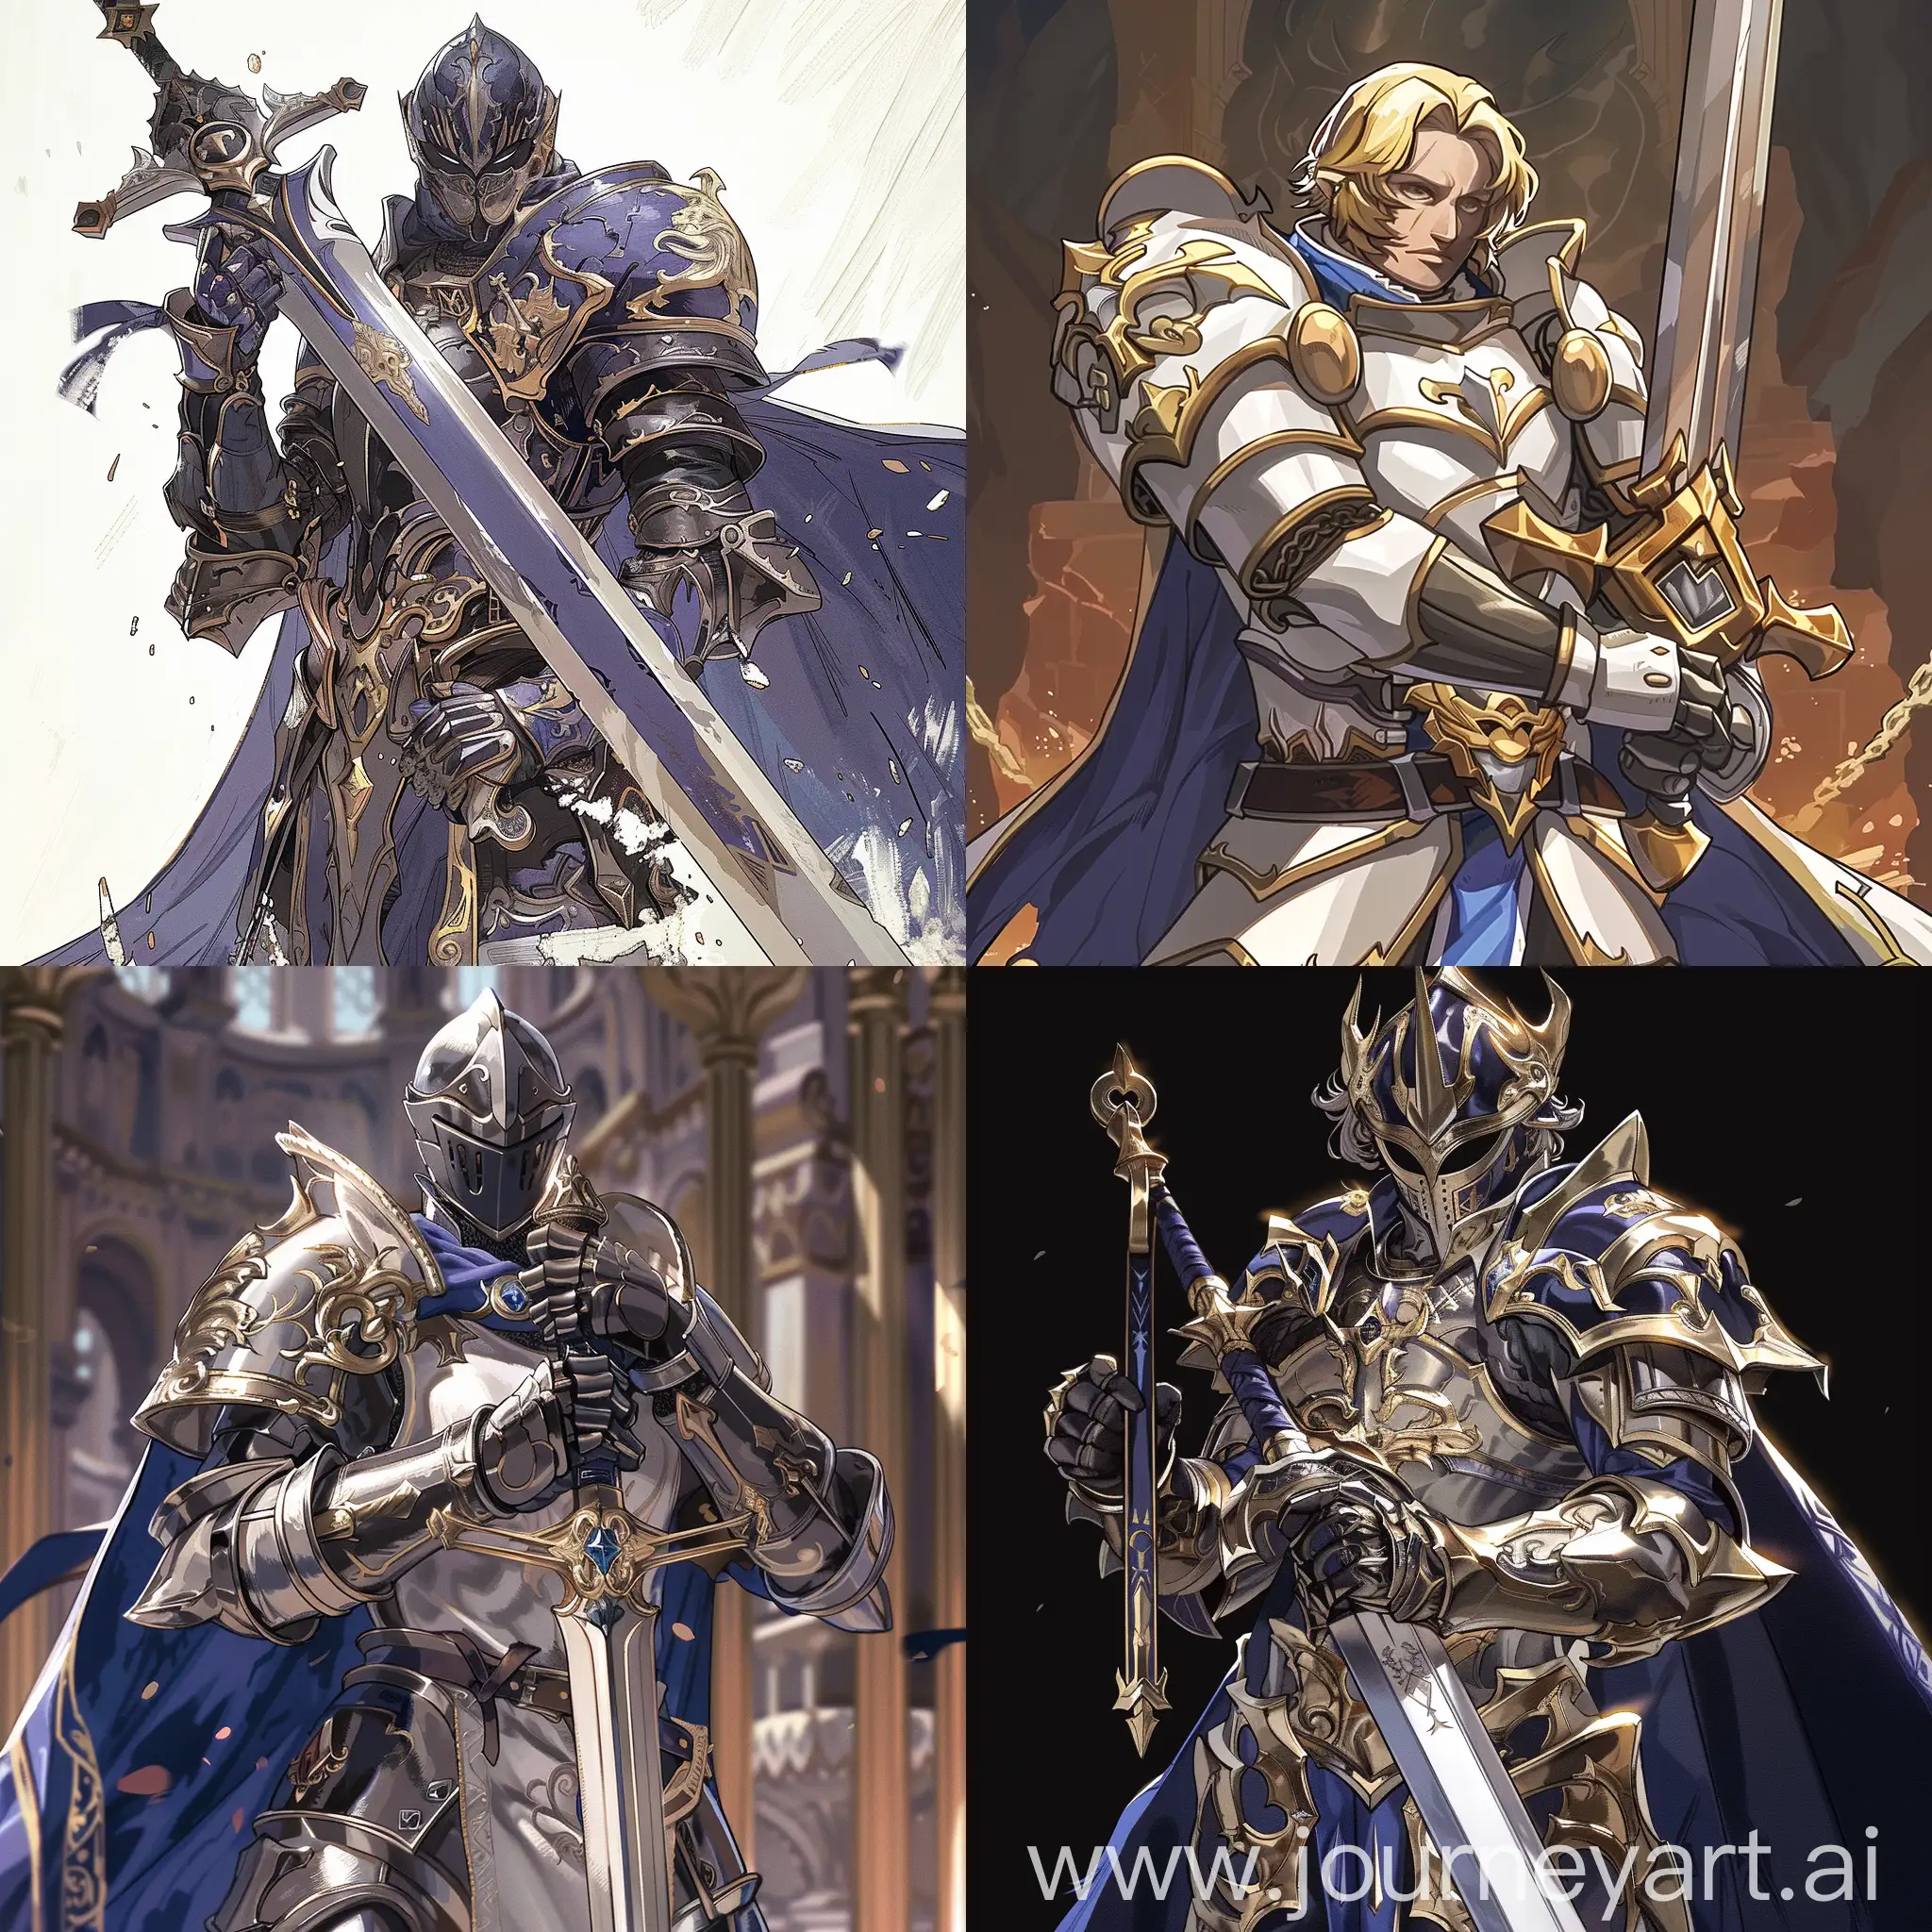 A knight holding a sword in granblue fantasy game style